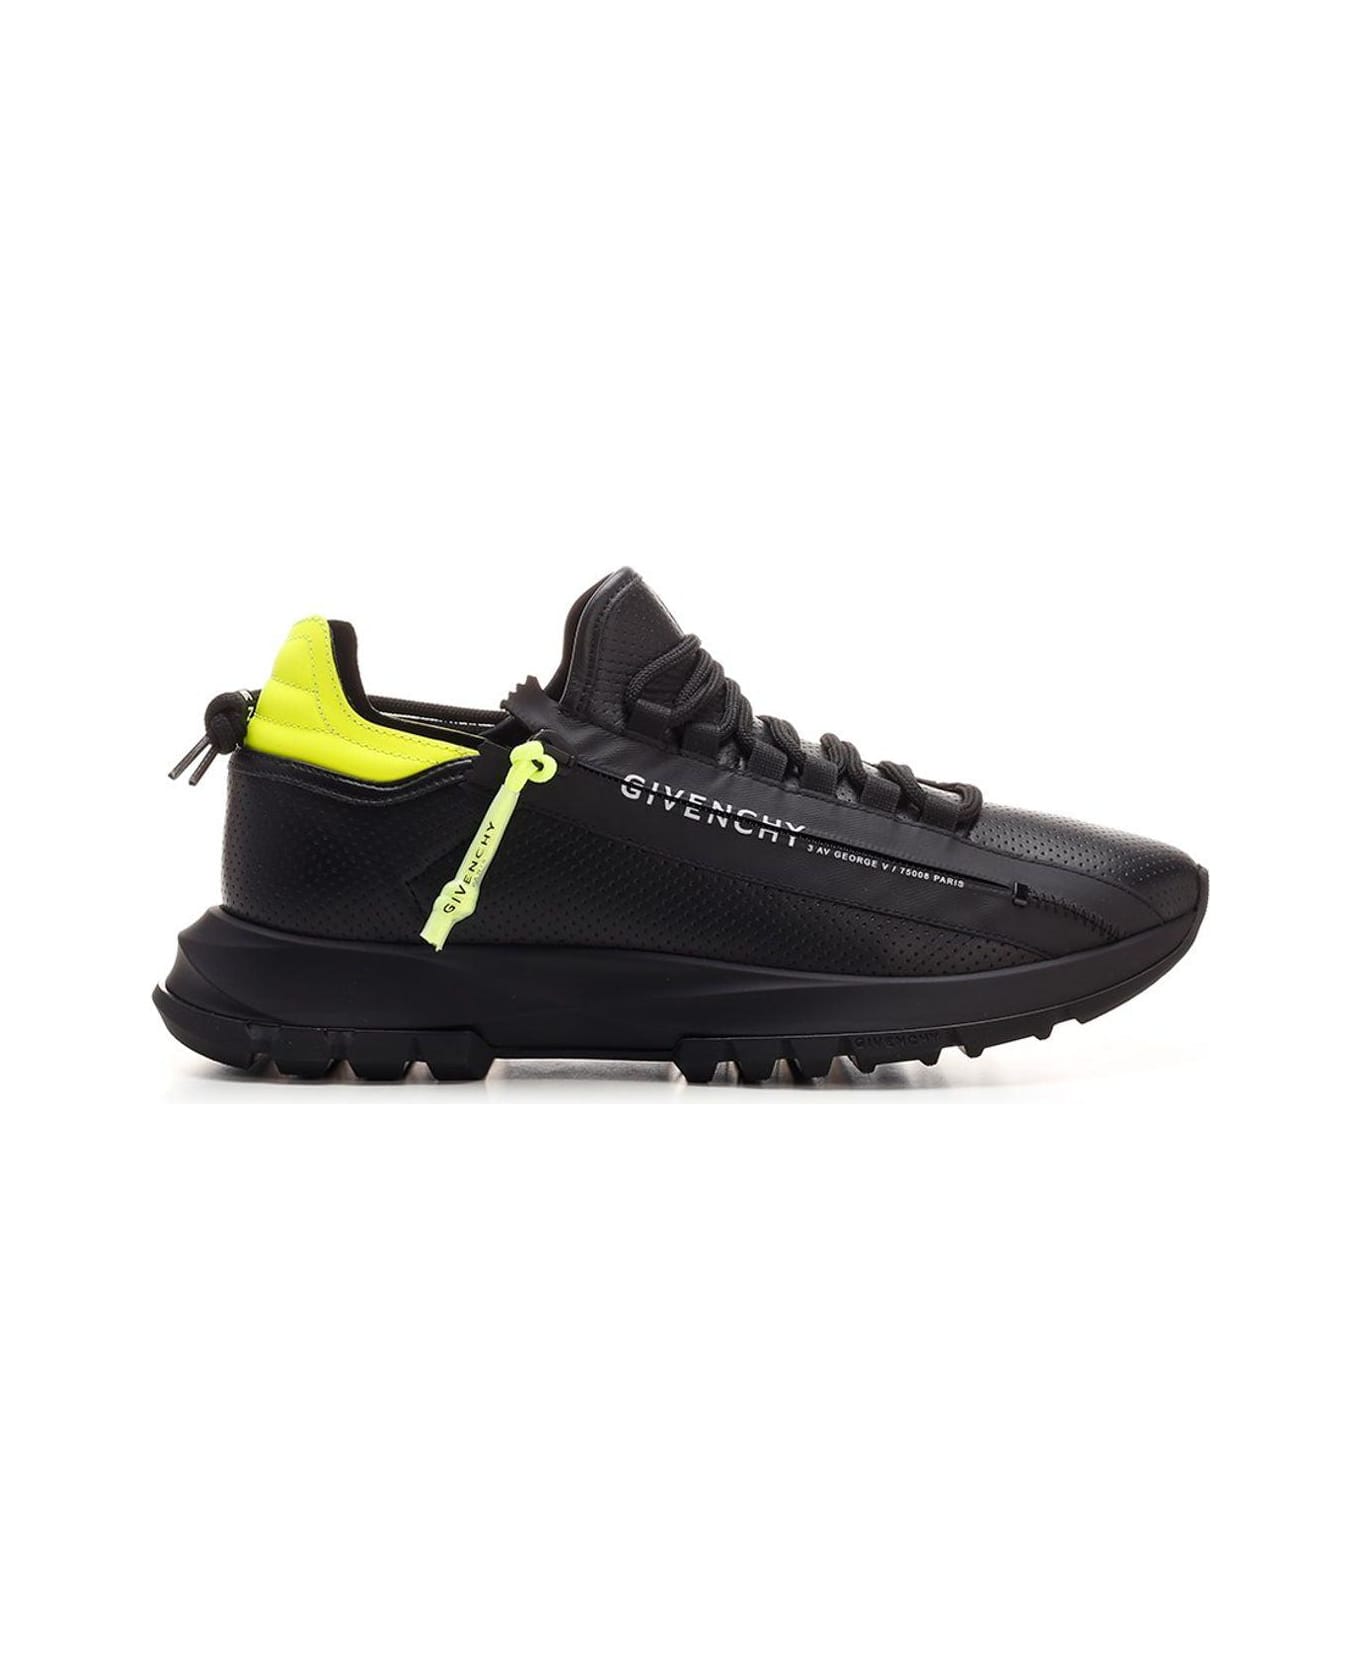 Givenchy Spectre Lace-up Sneakers - Black/yellow